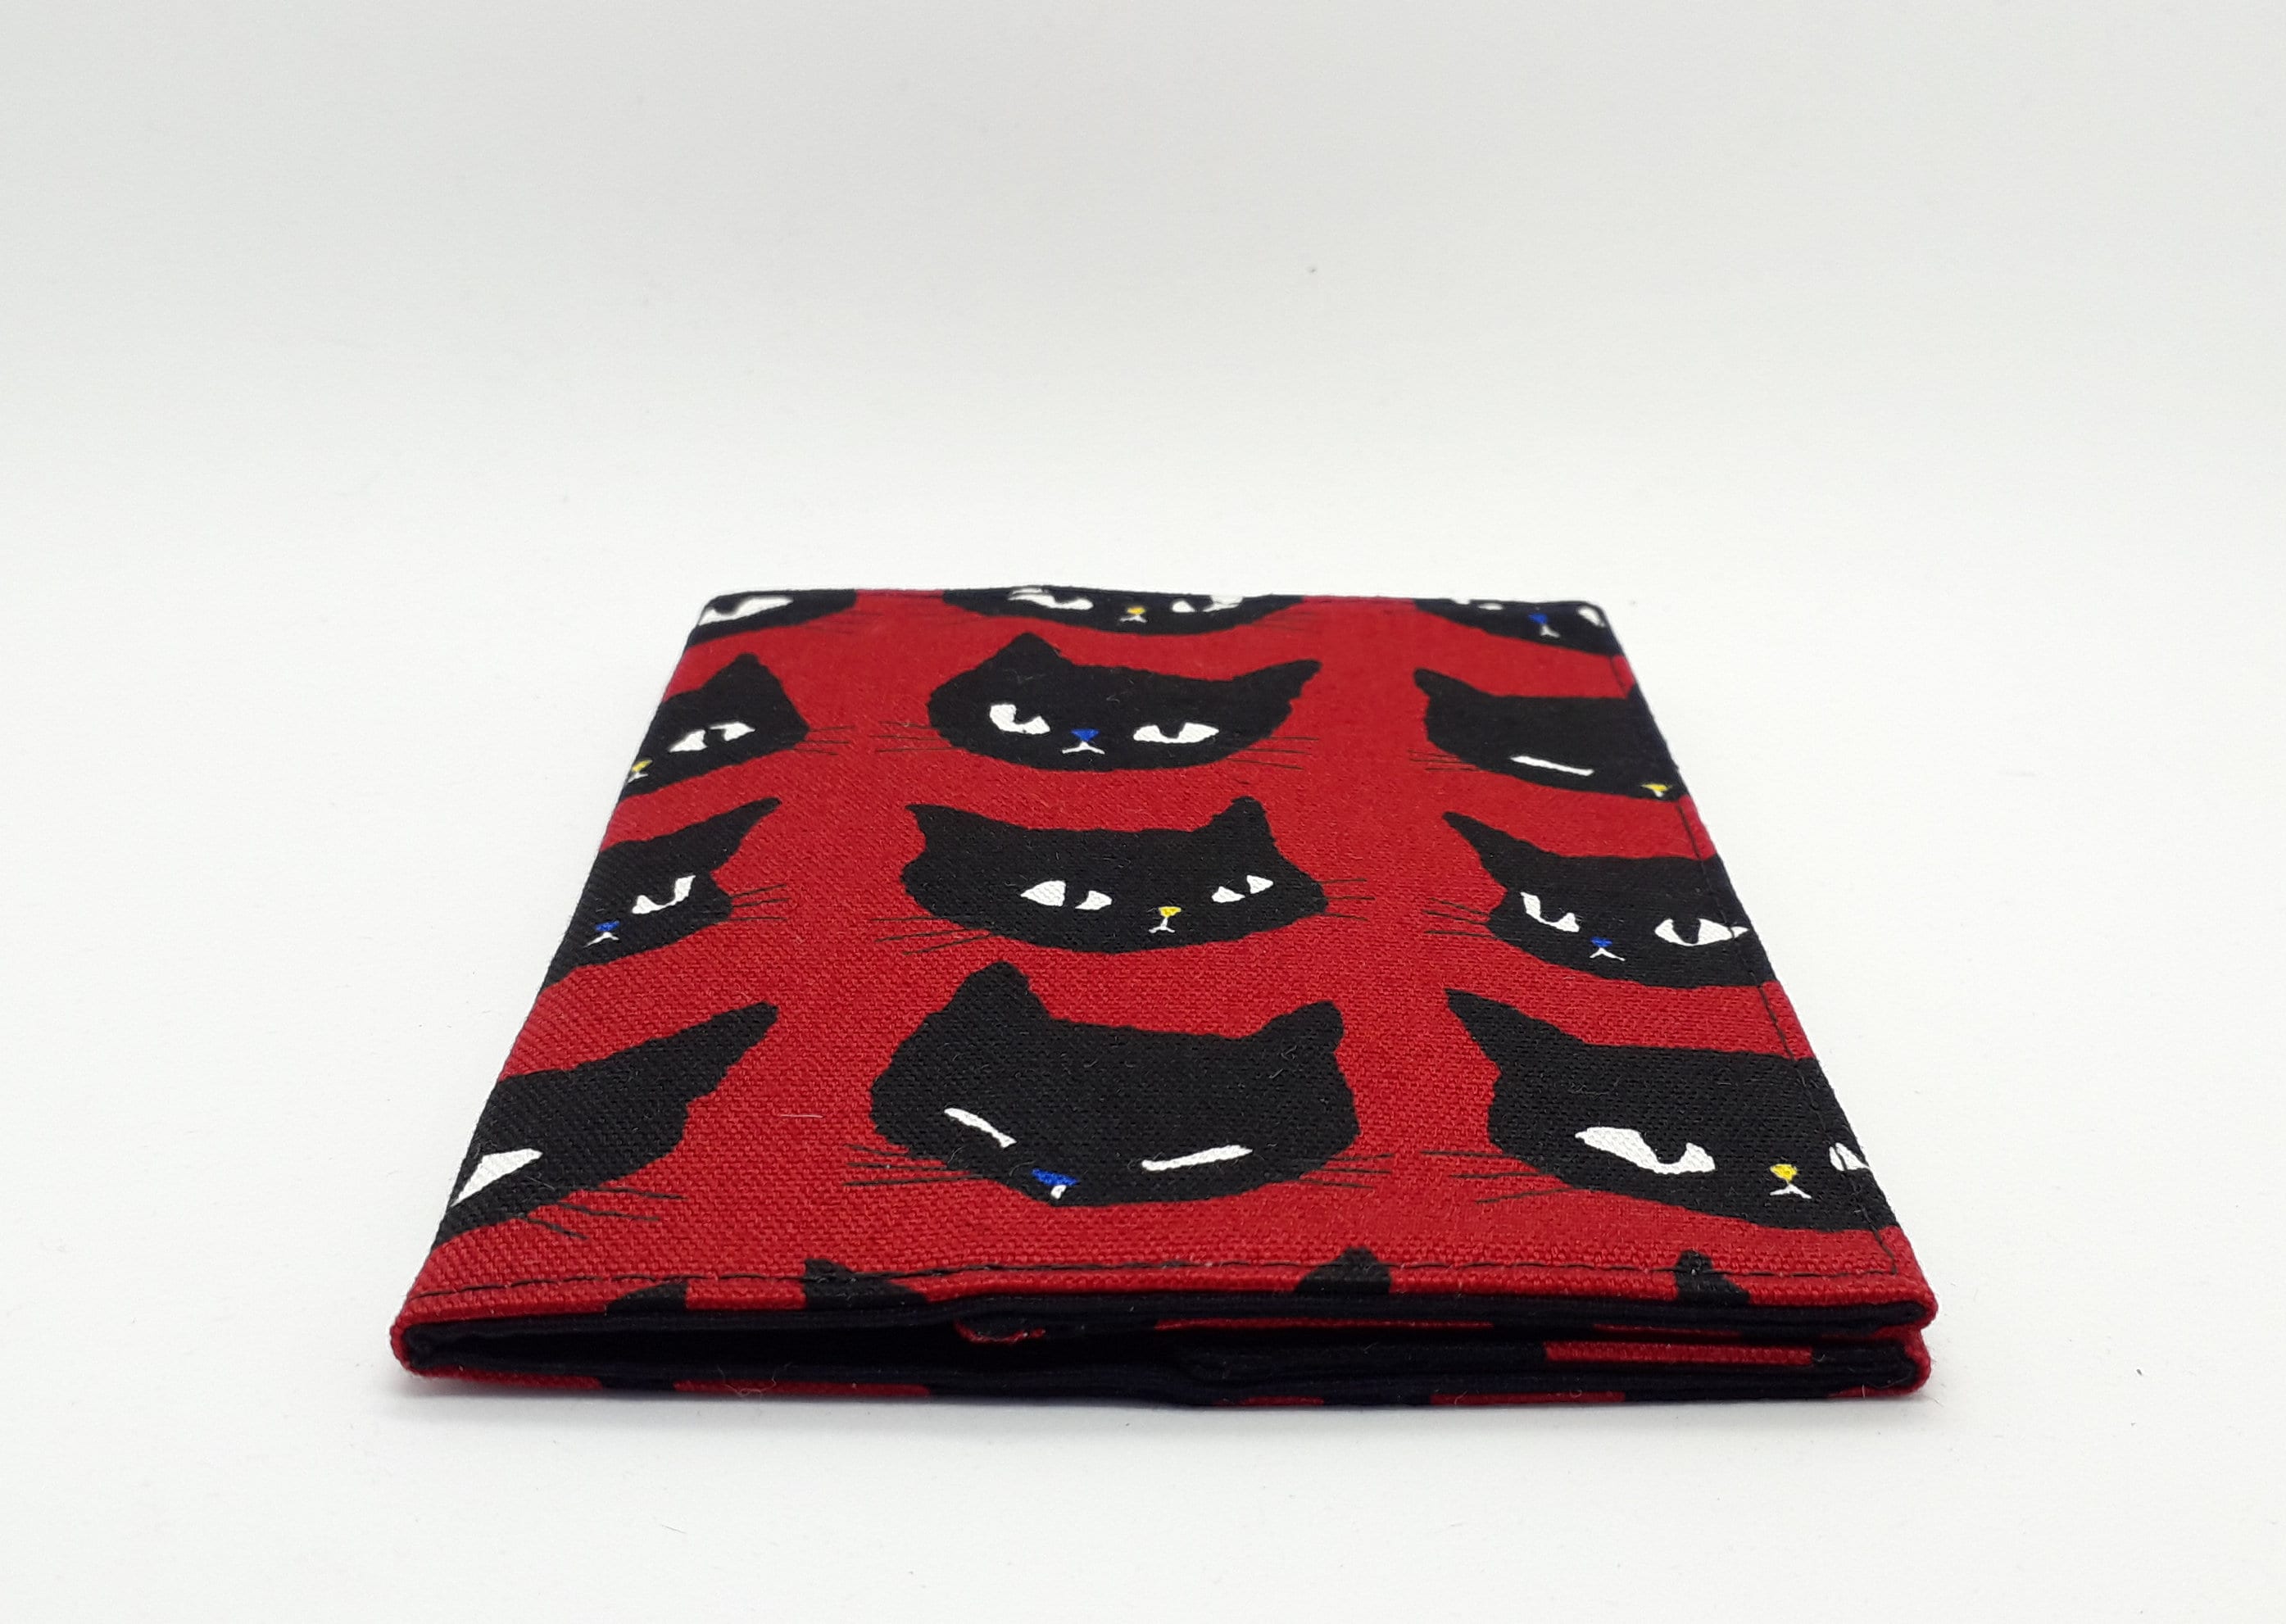 Cat-themed travel essentials in red & black